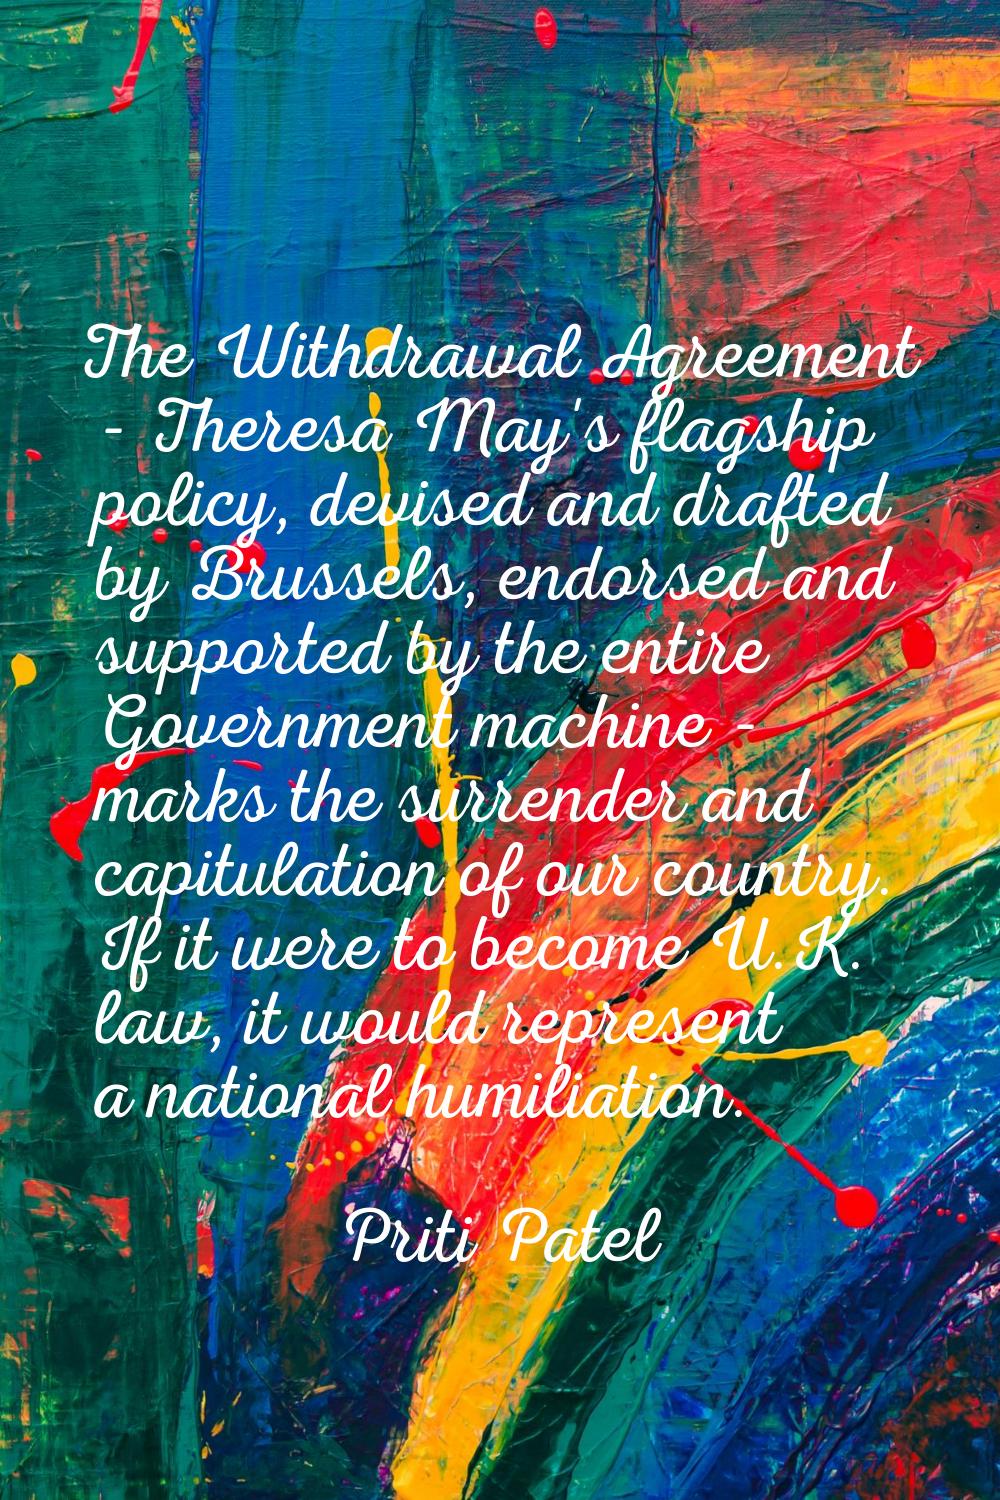 The Withdrawal Agreement - Theresa May's flagship policy, devised and drafted by Brussels, endorsed